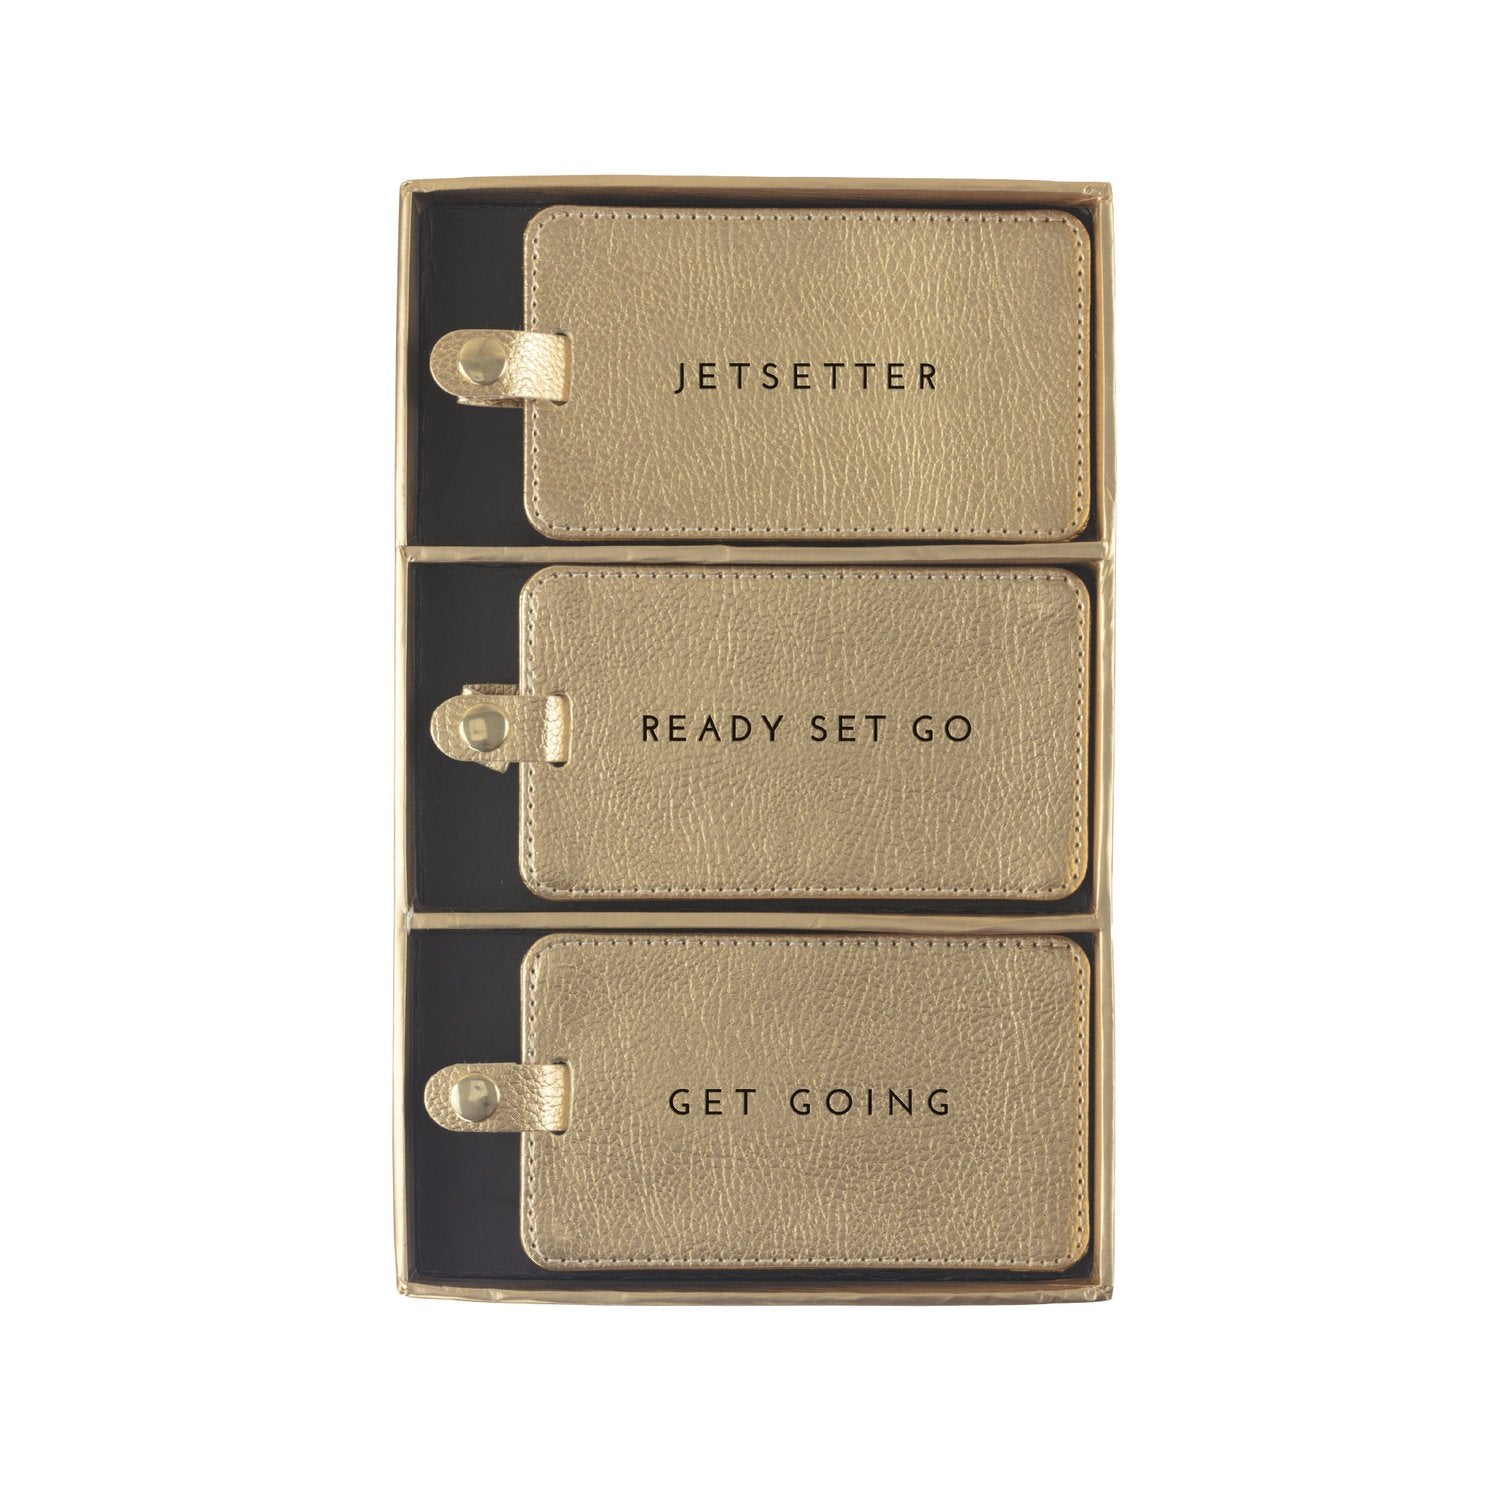 Eccolo Gold Faux Leather Luggage Tag Set with ID Cards